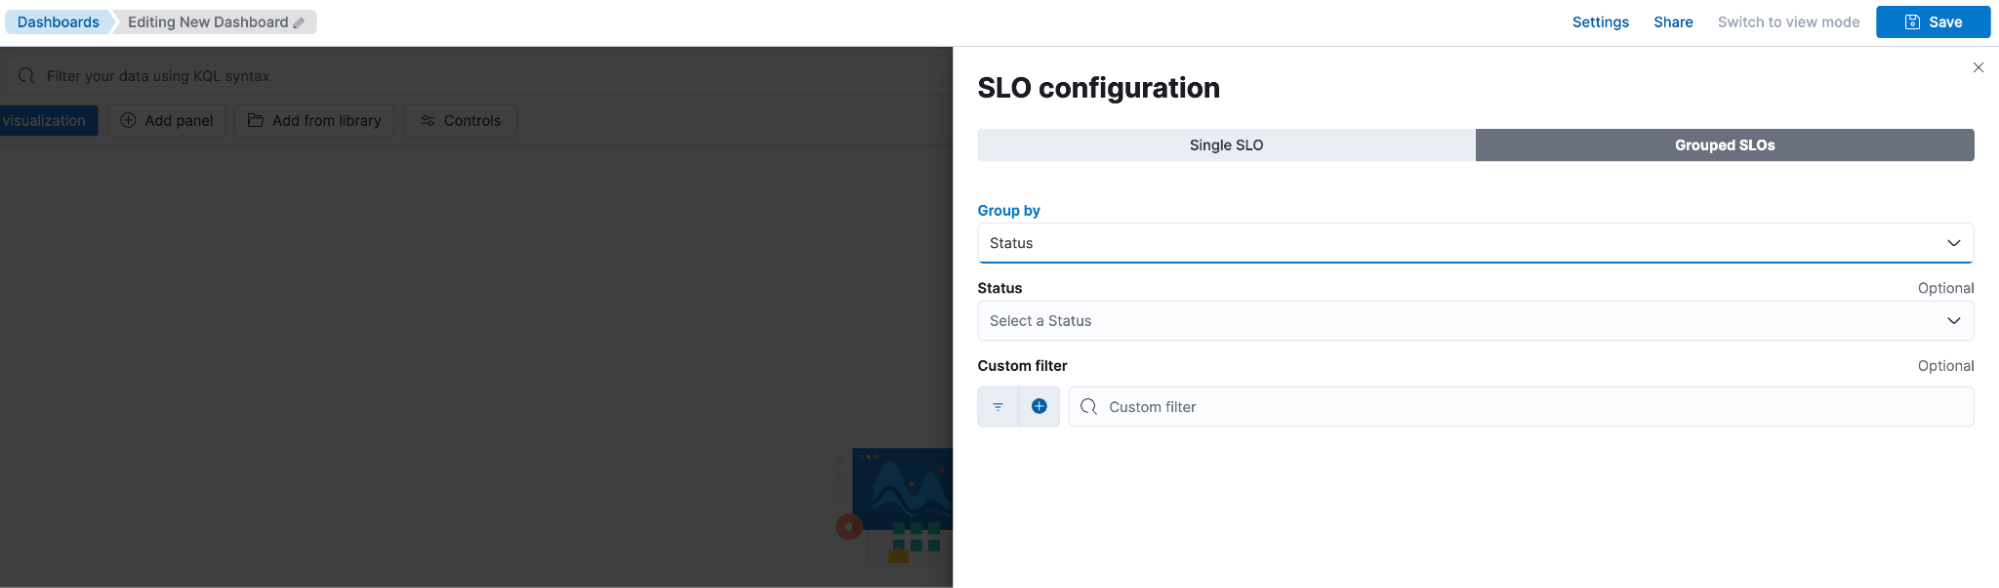 What’s new in 8.14: Screenshot of SLO configuration